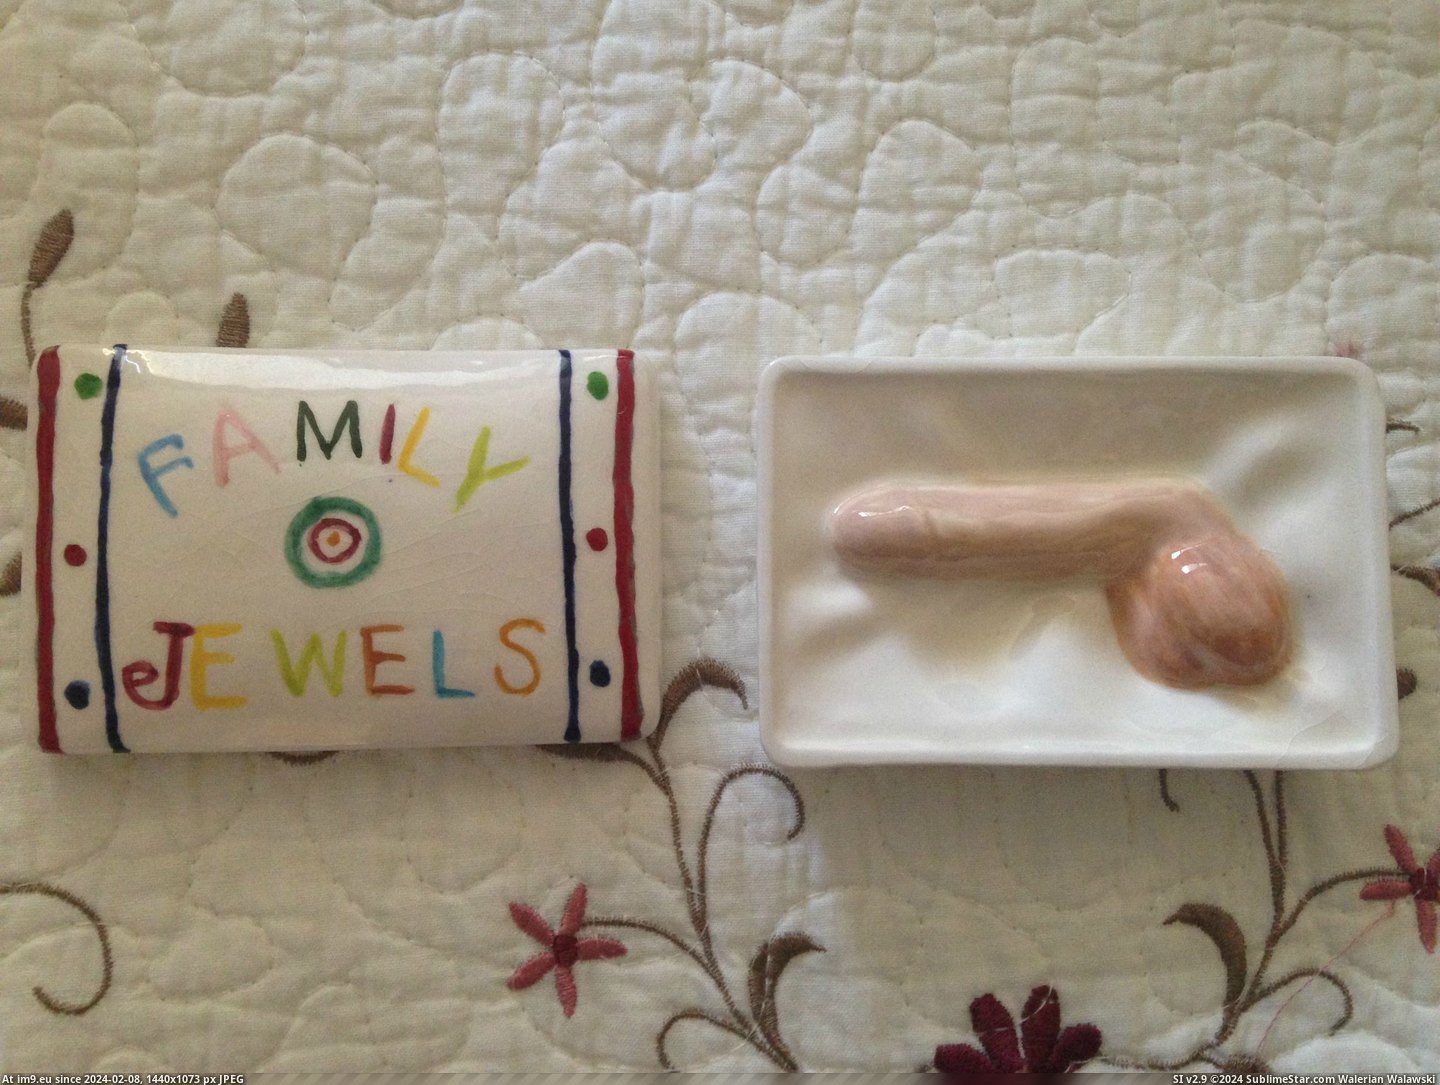 #Wtf #Art #Great #Out #Penis #Gave #Grandmother #Gifts #Got #She #Family #Boyfriend [Wtf] My Great-Grandmother got a boyfriend...so she made this penis art and gave it out as gifts to the family. [NSFW] 1 Pic. (Изображение из альбом My r/WTF favs))